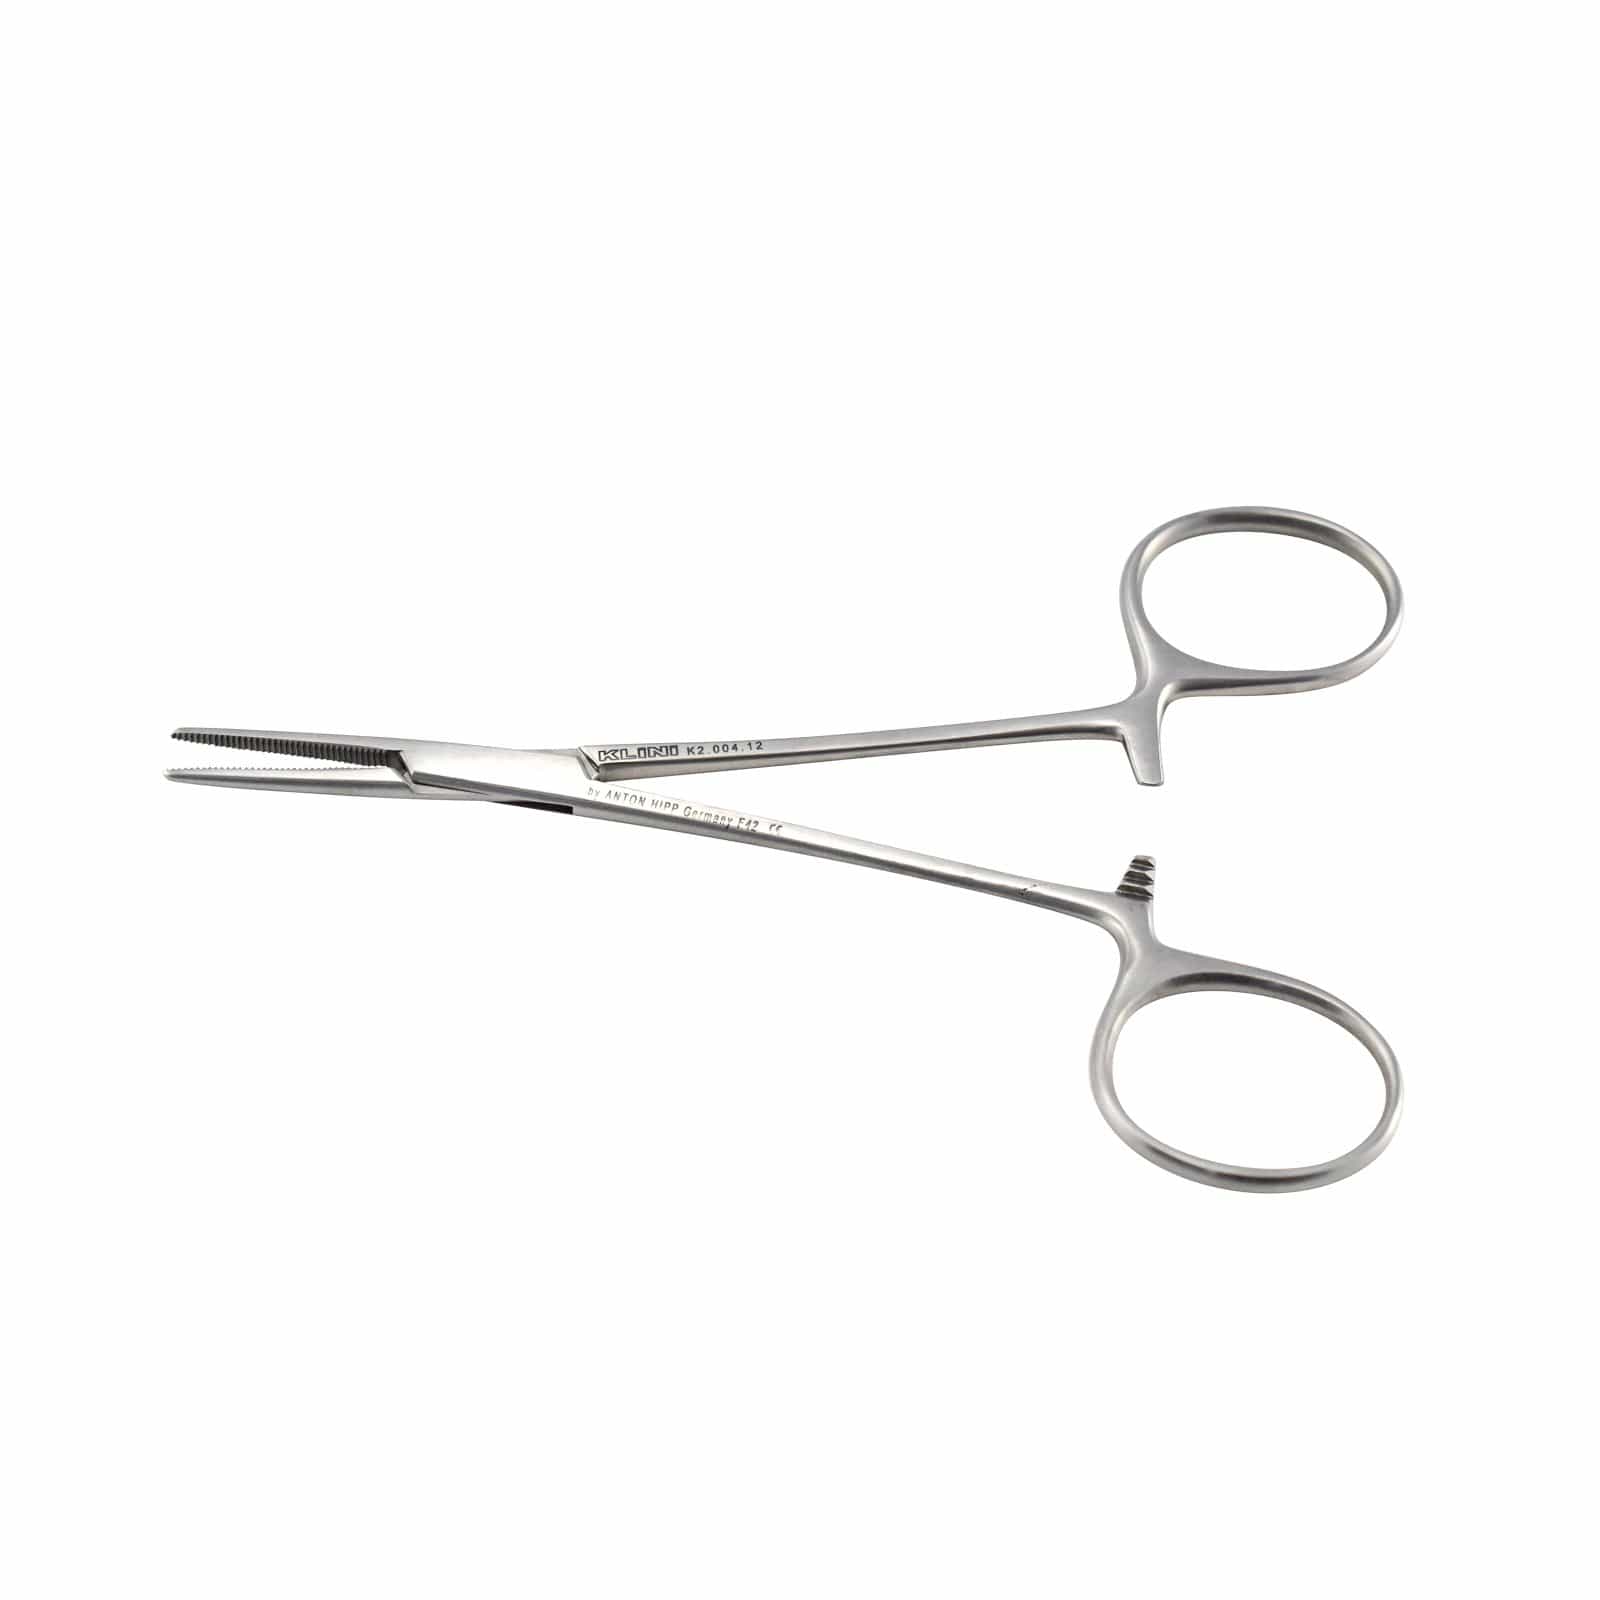 Klini Surgical Instruments 12.5cm / Straight / Standard Klini Halsted Mosquito Forceps